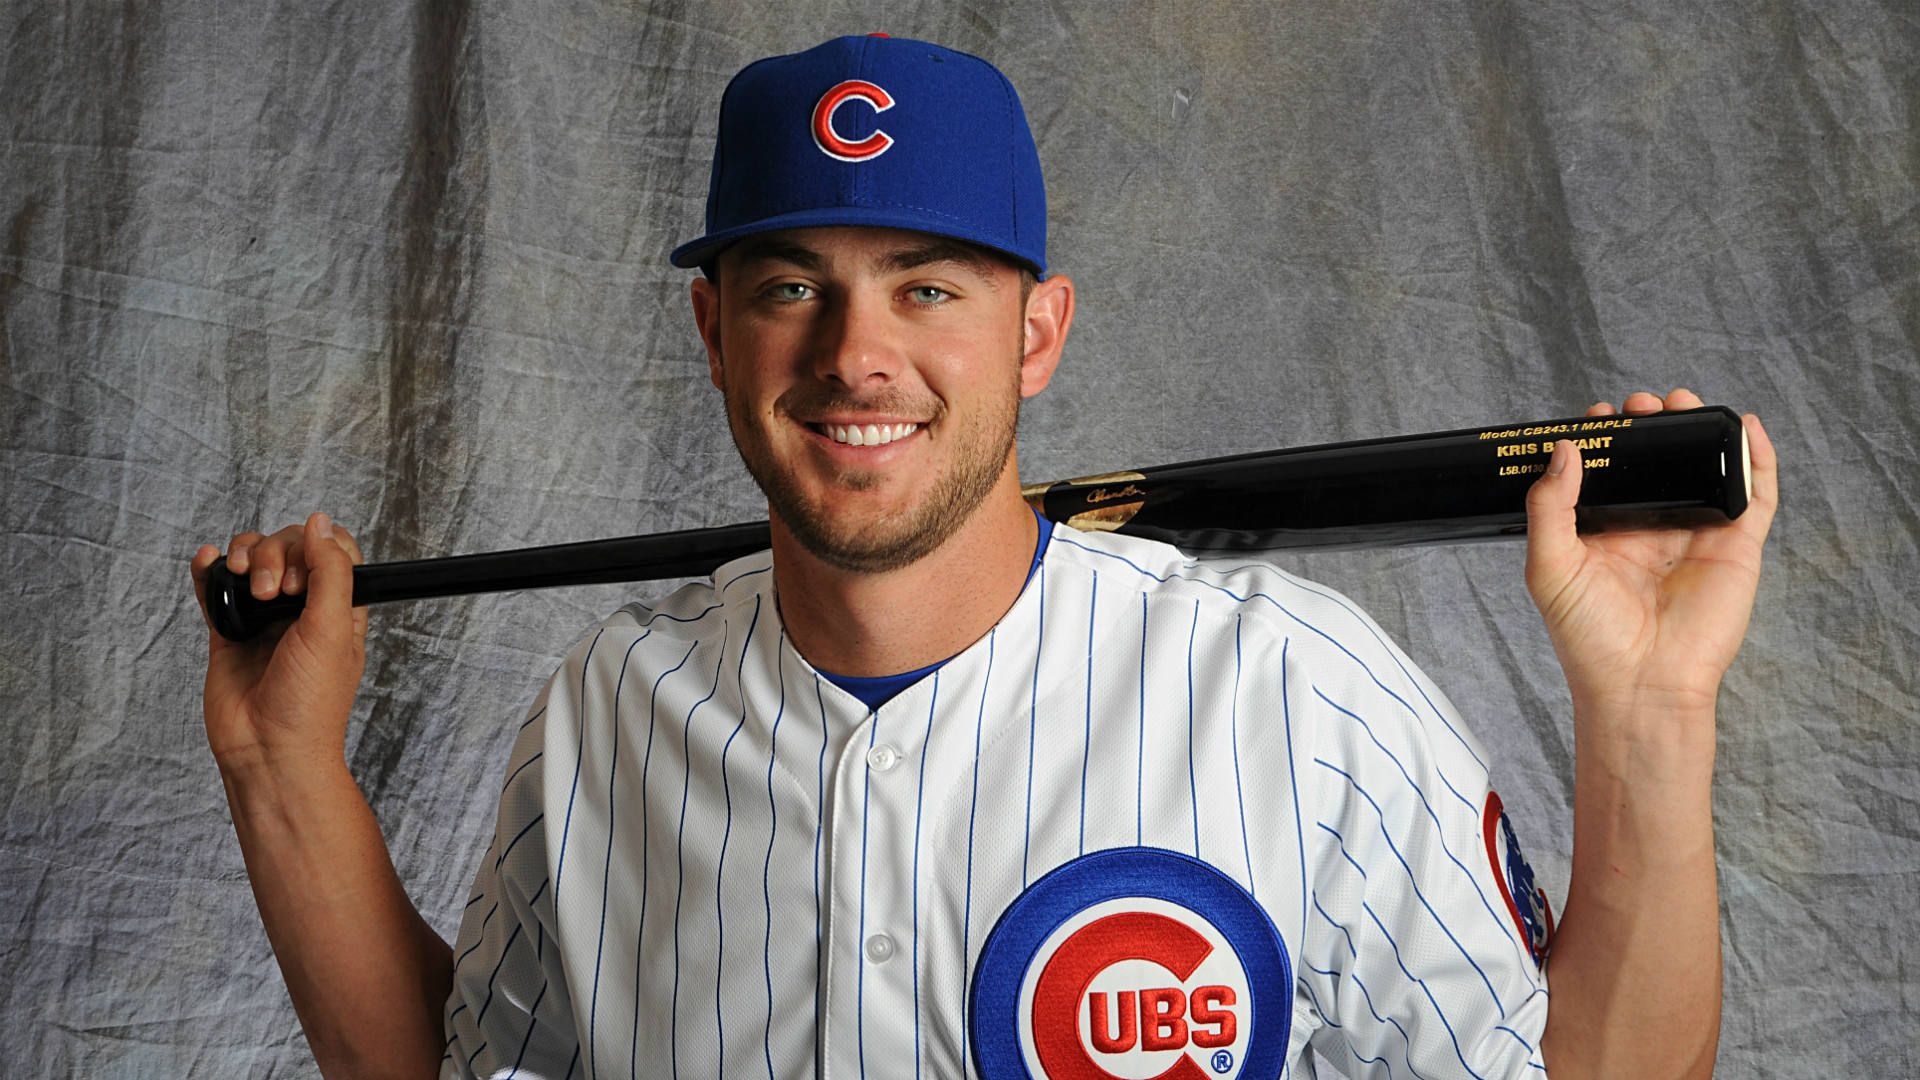 Kris Bryant, Sports icon, Chicago Cubs, Top player, 1920x1080 Full HD Desktop